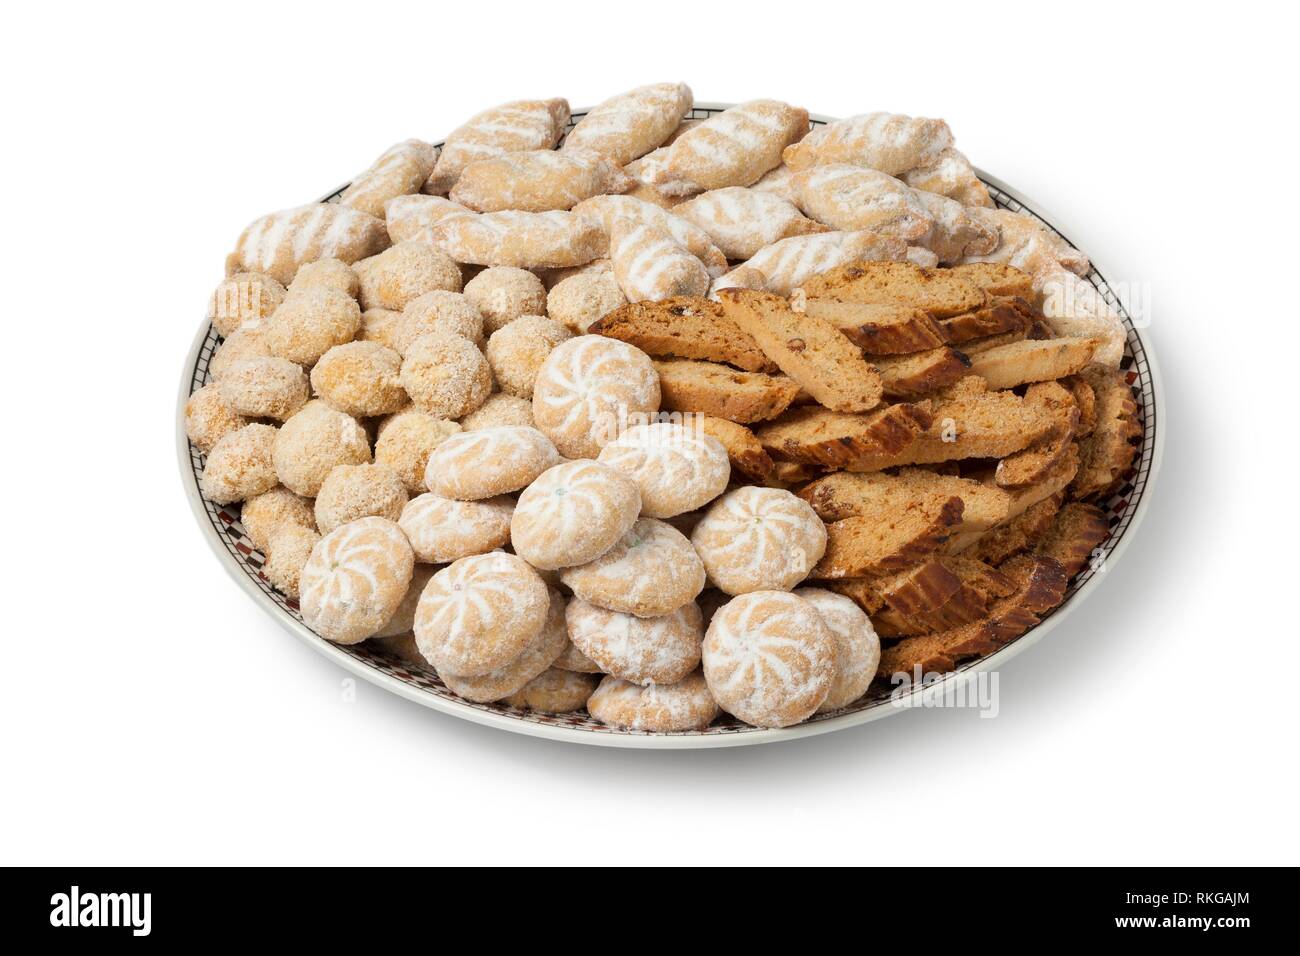 Dish with Moroccan festive homemade cookies isolated on white background. Stock Photo